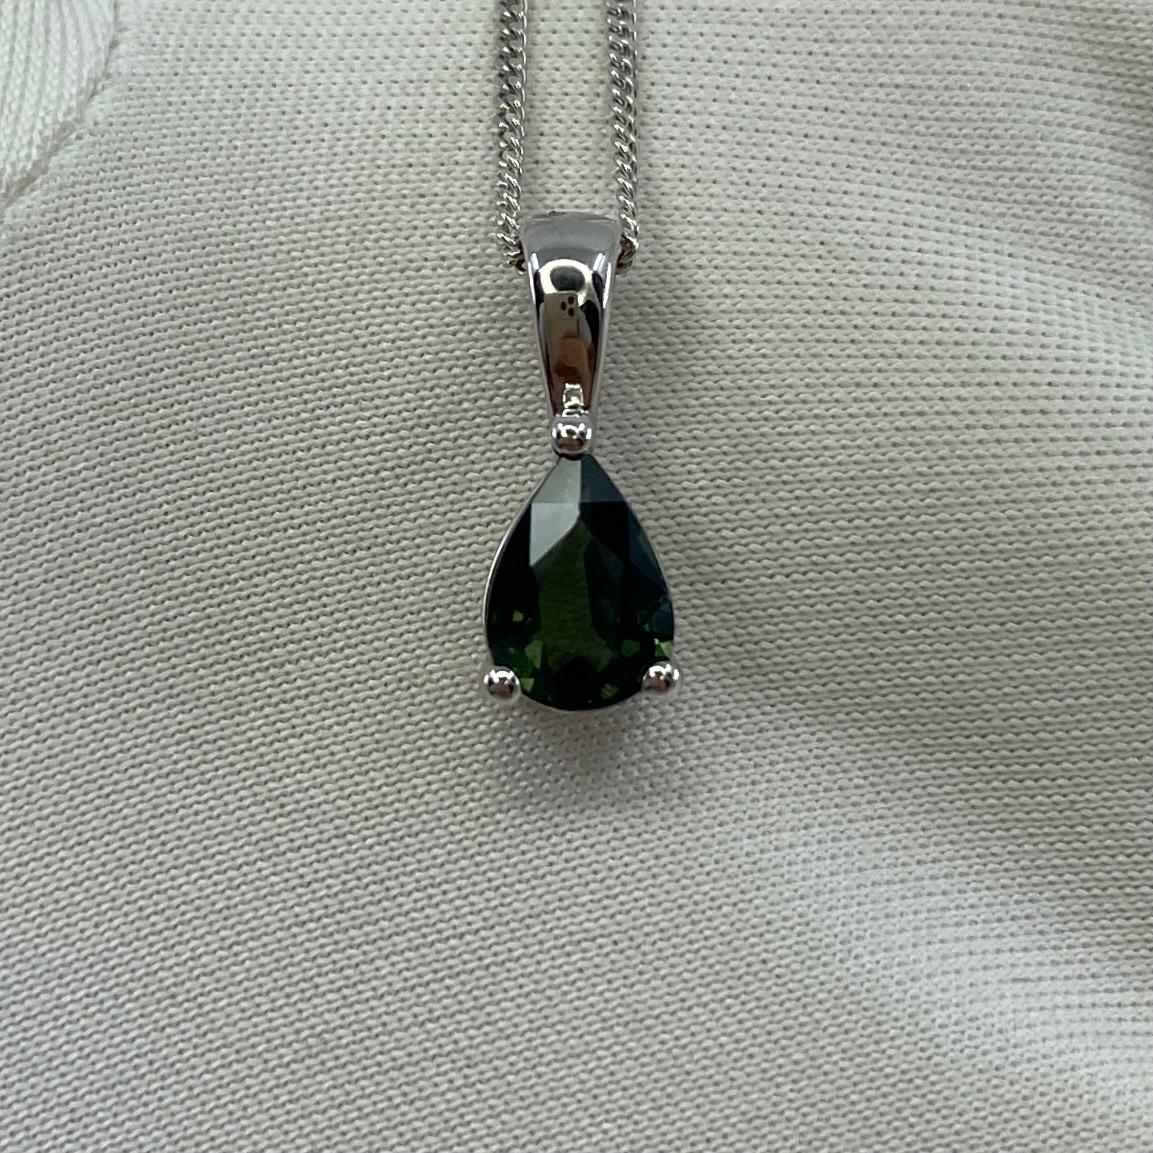 Fine Vivid Green Blue Untreated Australian Sapphire 18k White Gold Pendant Necklace.

Stunning 1.00 carat sapphire with a vivid green blue colour and excellent clarity, very clean stone. Set in a beautiful 18k white gold solitaire pendant